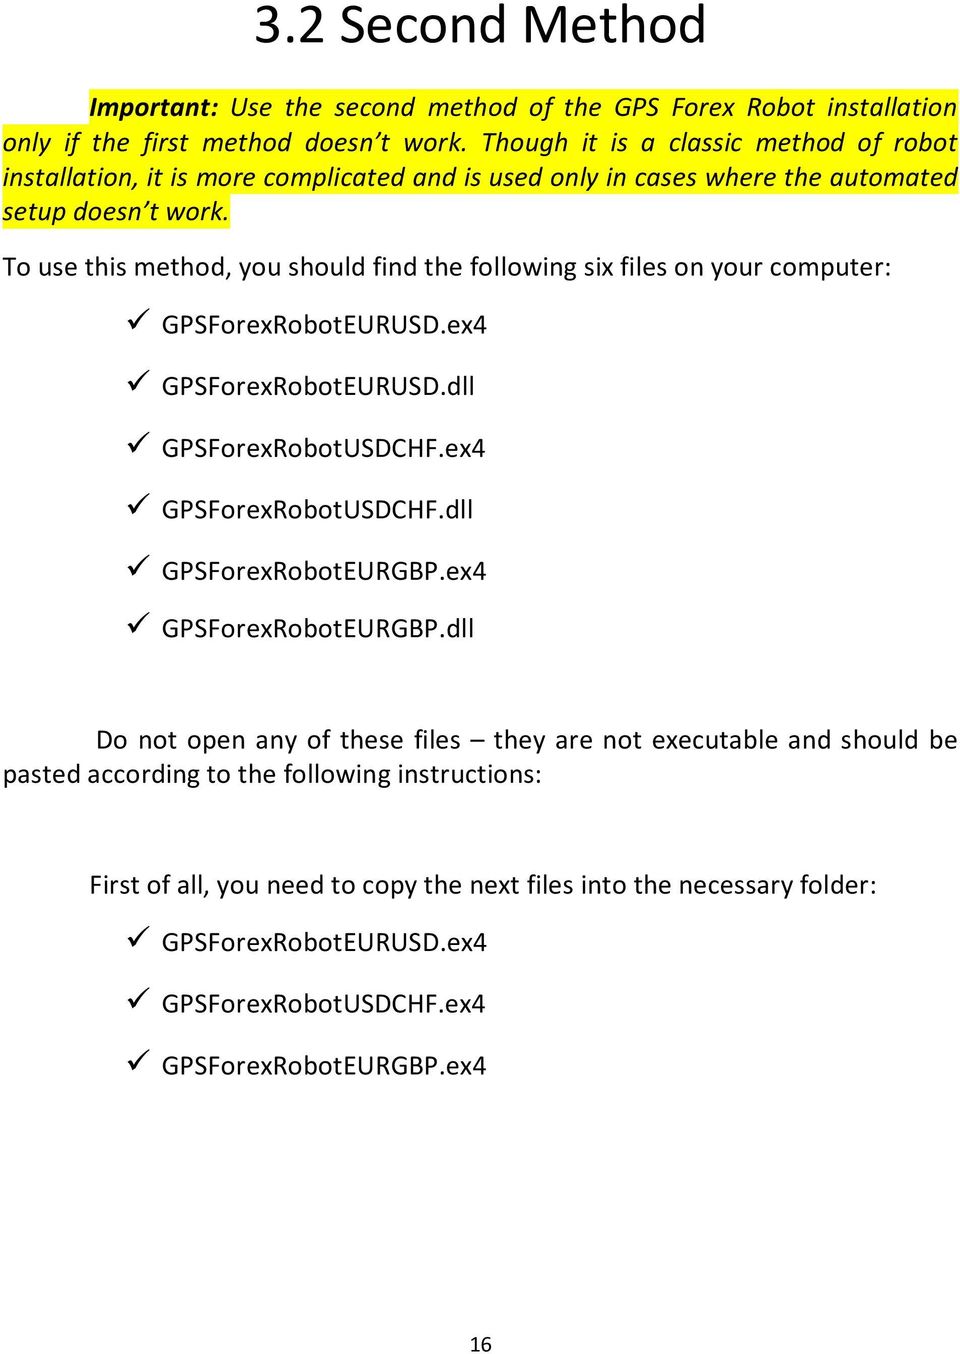 To use this method, you should find the following six files on your computer: GPSForexRobotEURUSD.ex4 GPSForexRobotEURUSD.dll GPSForexRobotUSDCHF.ex4 GPSForexRobotUSDCHF.